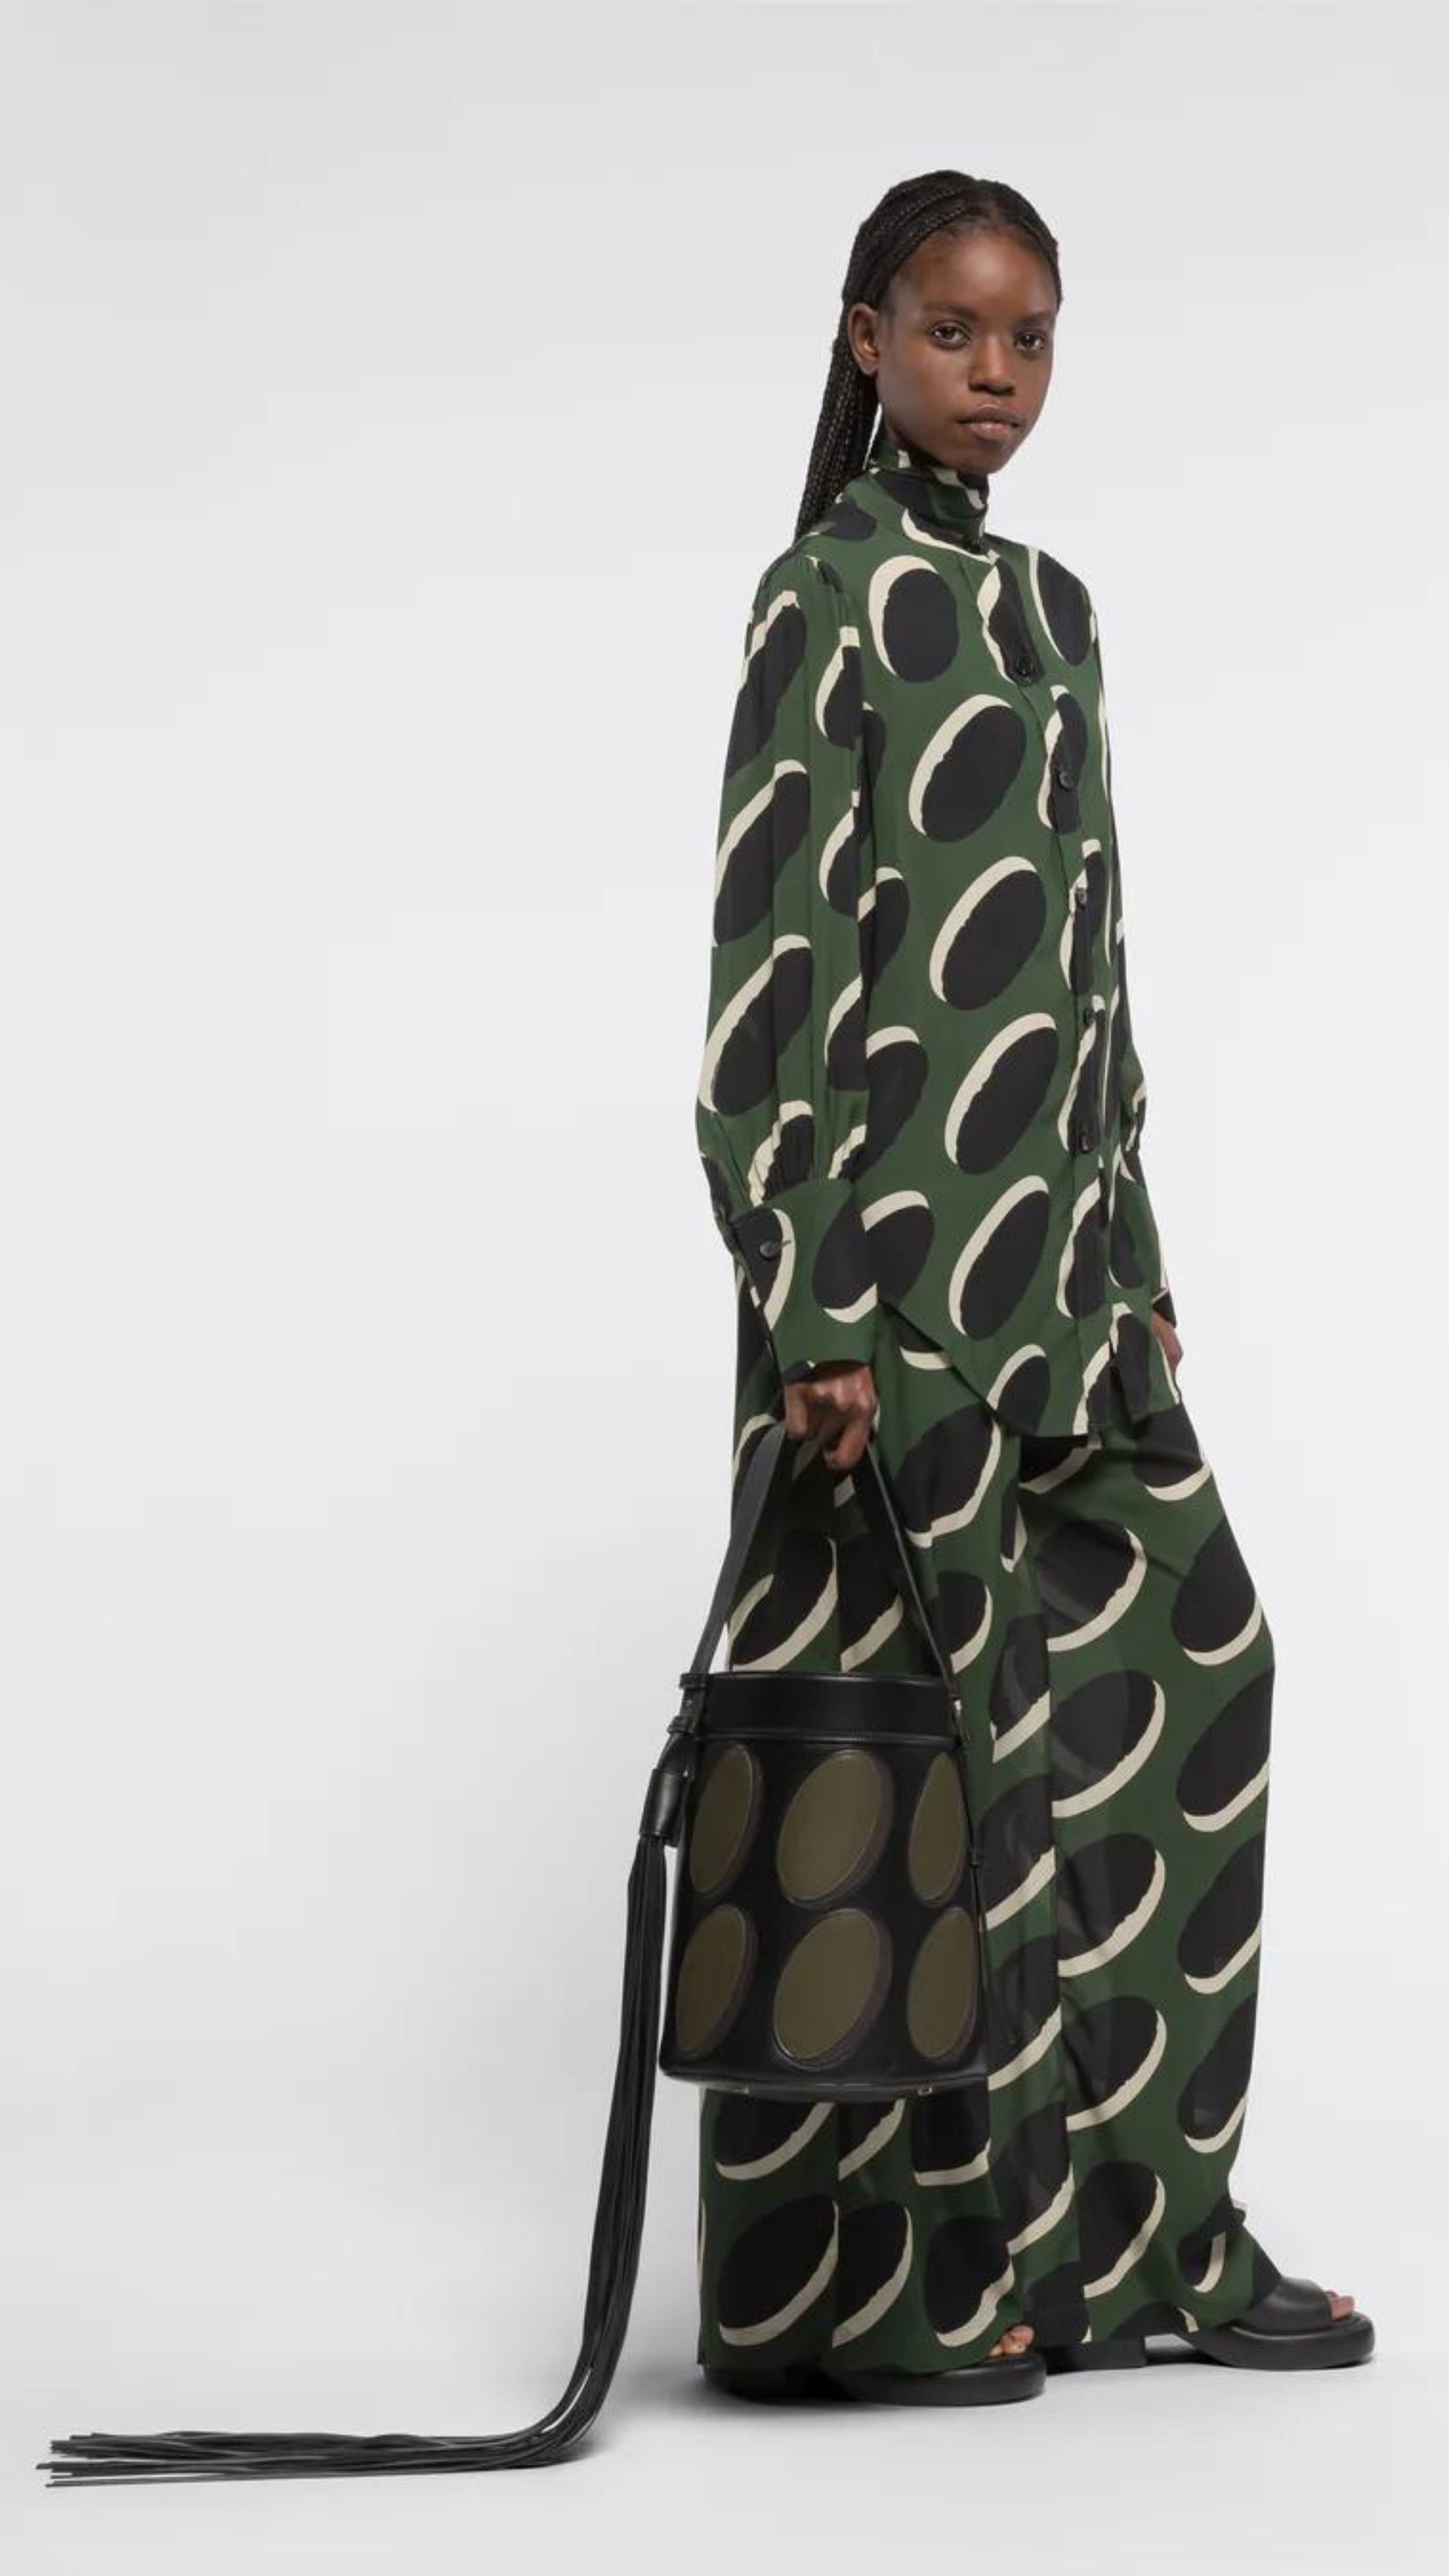 AZ Factory Colville Molly Molloy Lucinda Chambers,  Leather Patchwork Midi Bucket Bag.. Black oval bucket back in black leather with olive green ovals patches. Has an adjustable black handle and a dramatic oversize black leather tassel. Product shown with a model.